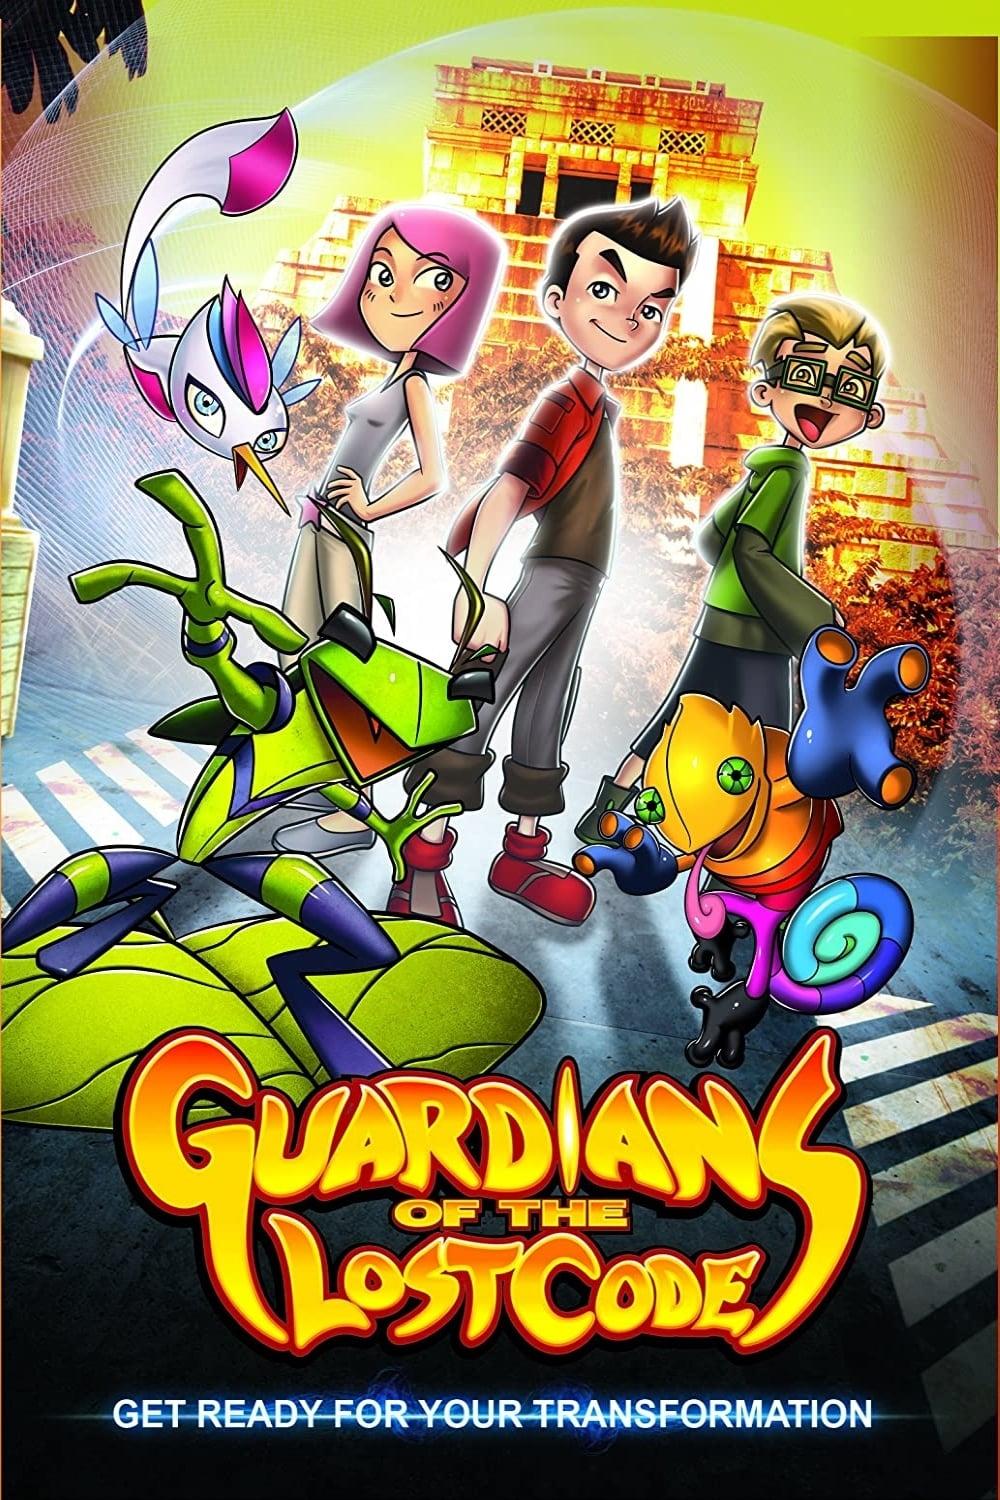 Guardians of the Lost Code poster